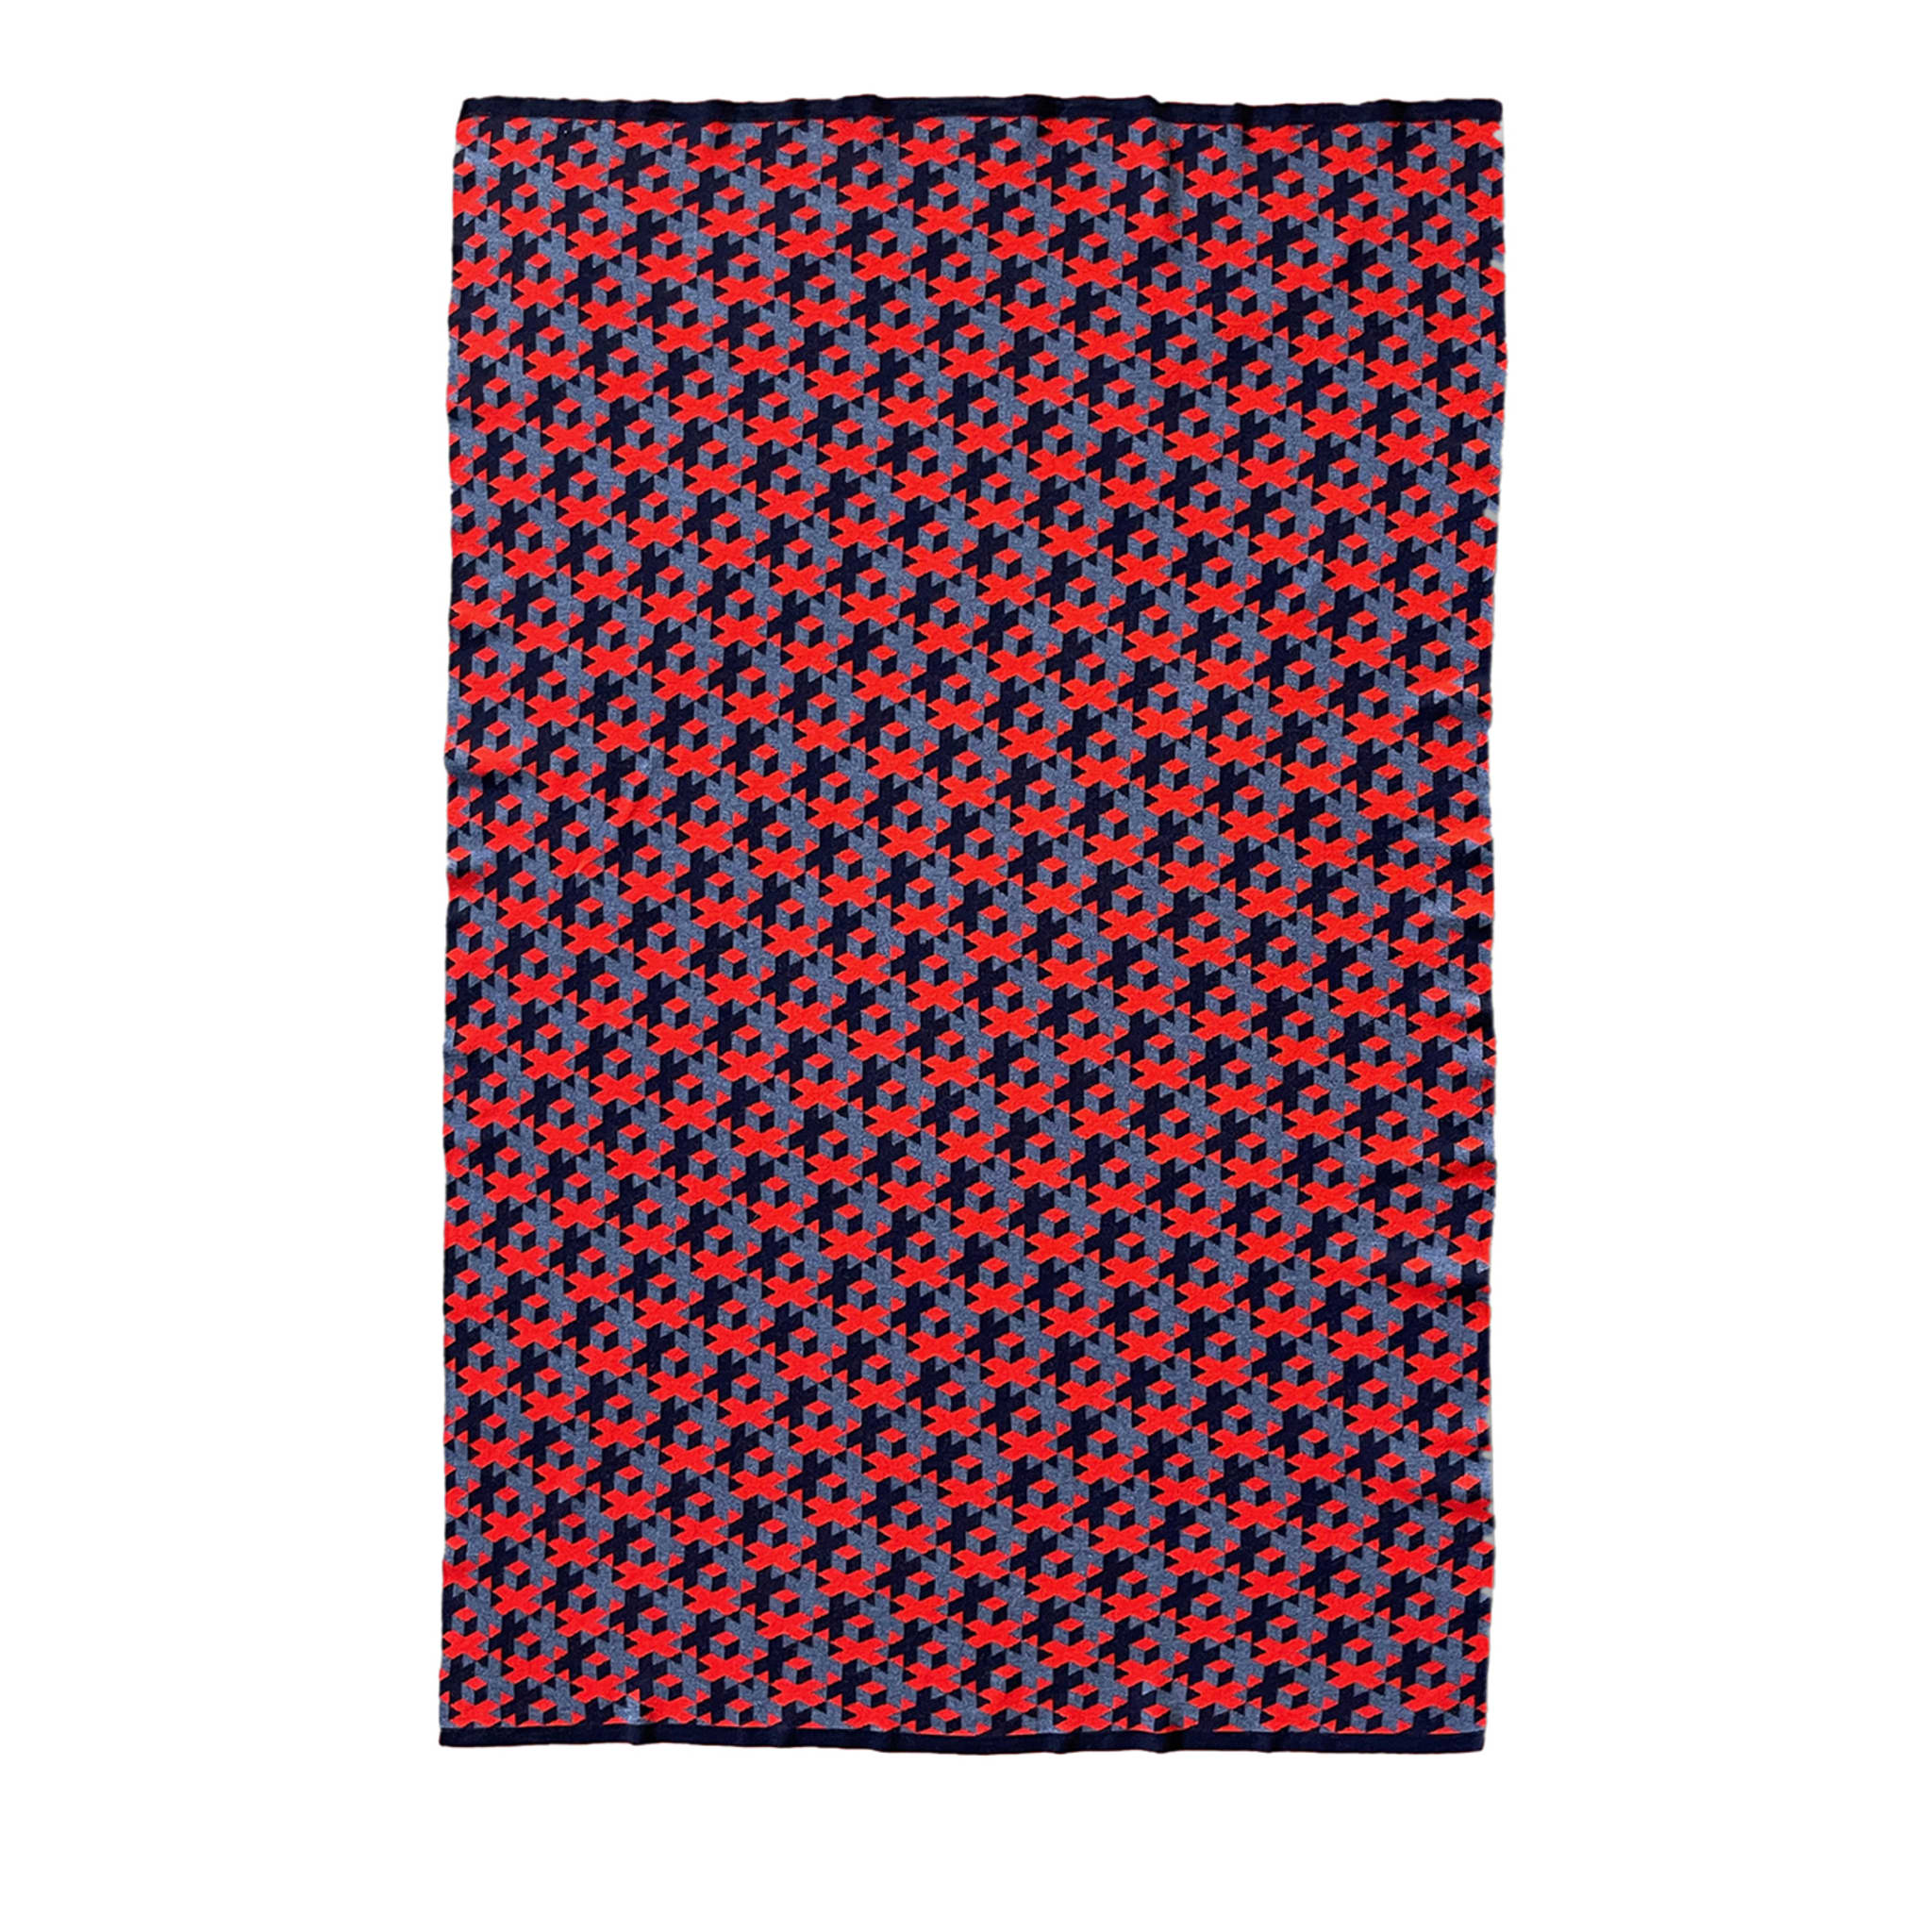 Plaid Lana 01 Patterned Red & Gray Blanket by Giulio Iacchetti - Main view